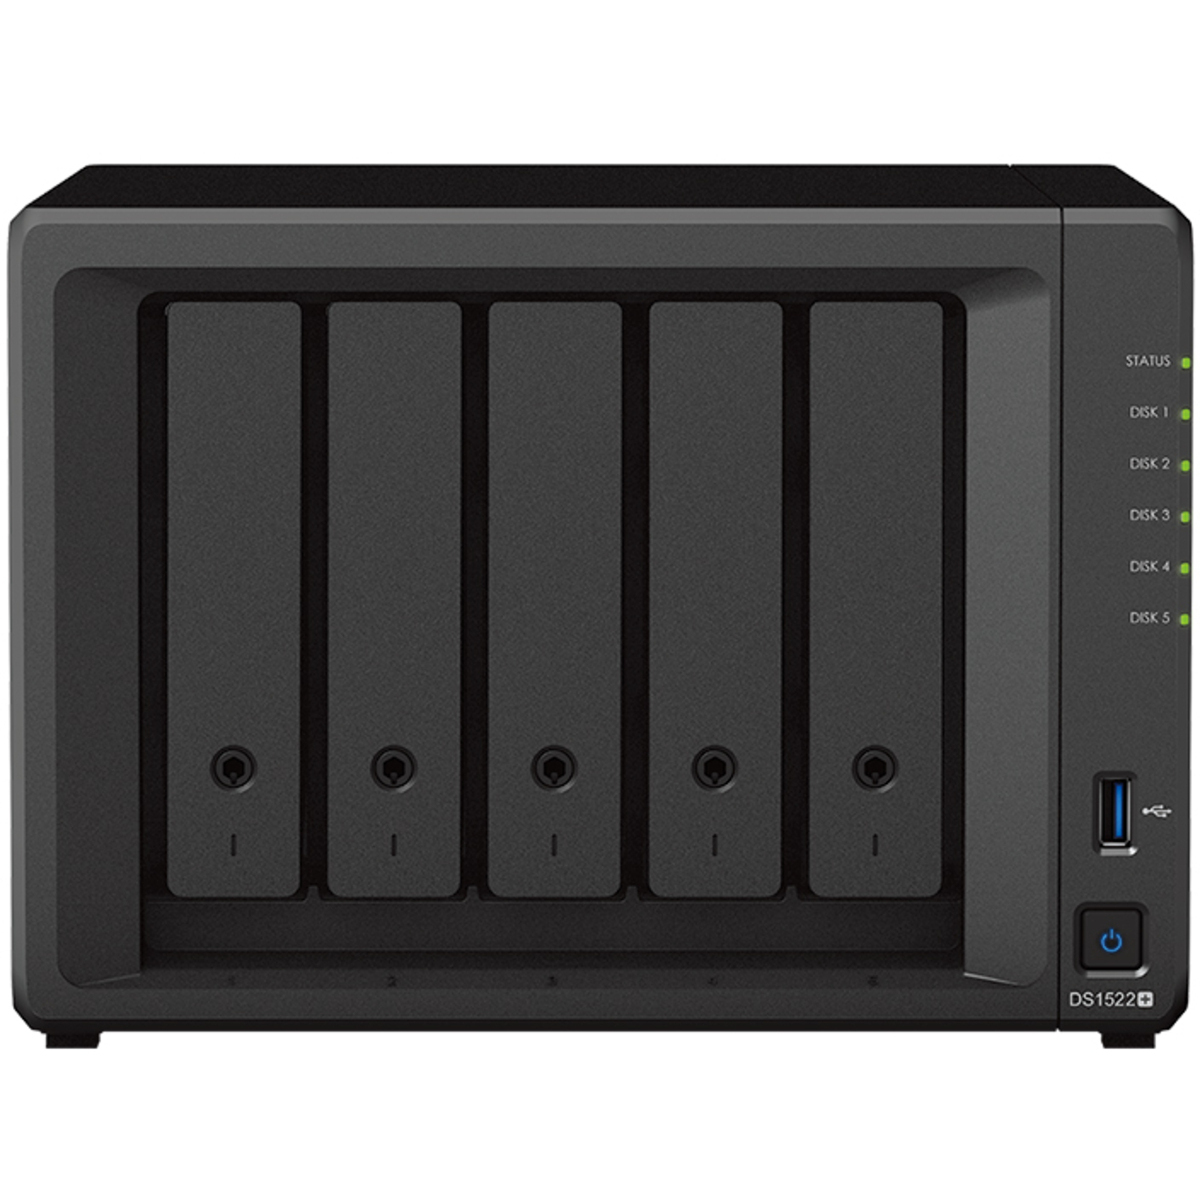 Synology DiskStation DS1522+ 120tb 5-Bay Desktop Multimedia / Power User / Business NAS - Network Attached Storage Device 5x24tb Seagate IronWolf Pro ST24000NT002 3.5 7200rpm SATA 6Gb/s HDD NAS Class Drives Installed - Burn-In Tested - ON SALE DiskStation DS1522+